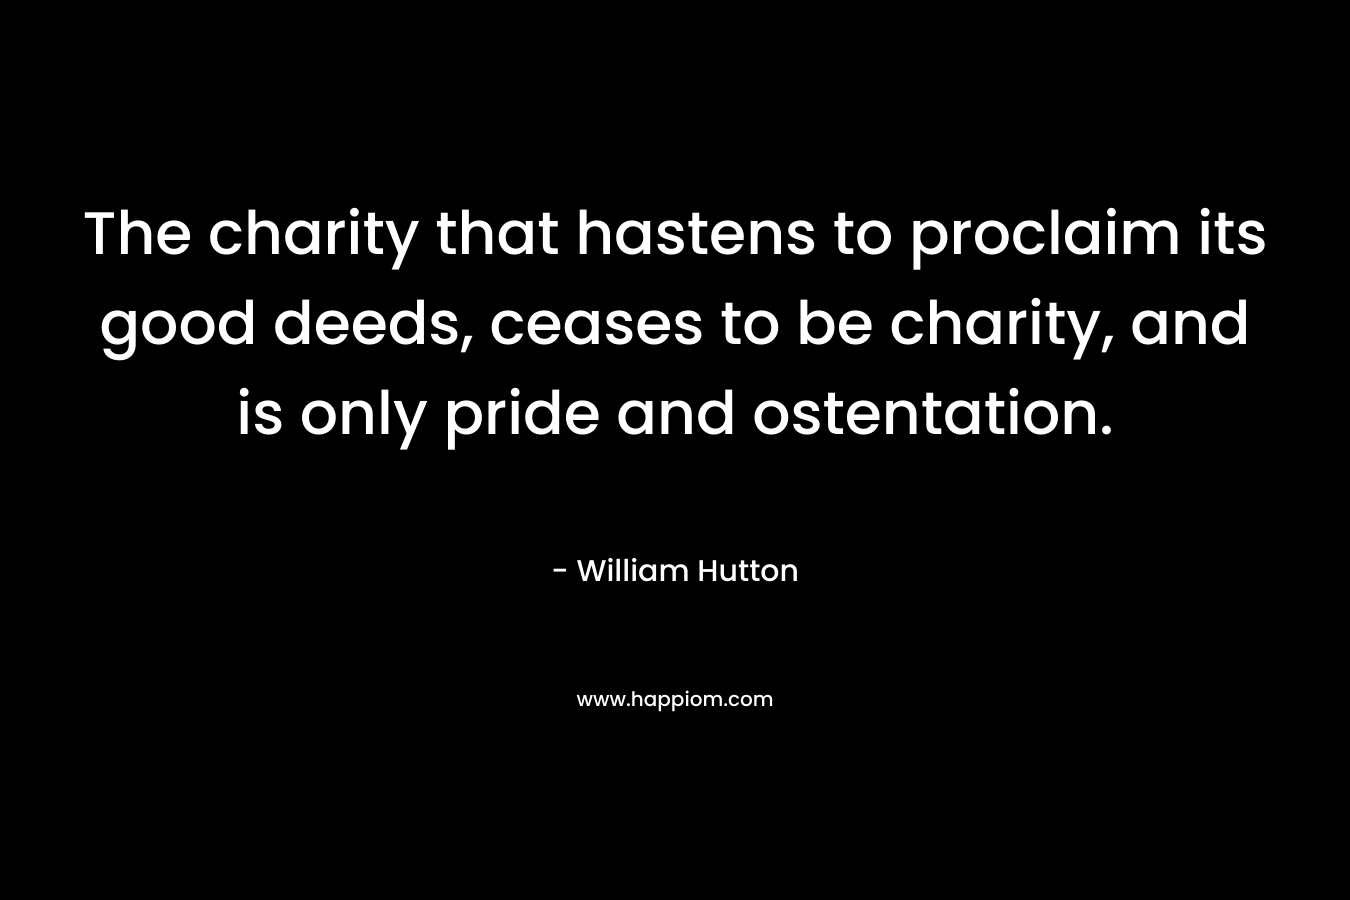 The charity that hastens to proclaim its good deeds, ceases to be charity, and is only pride and ostentation. – William Hutton